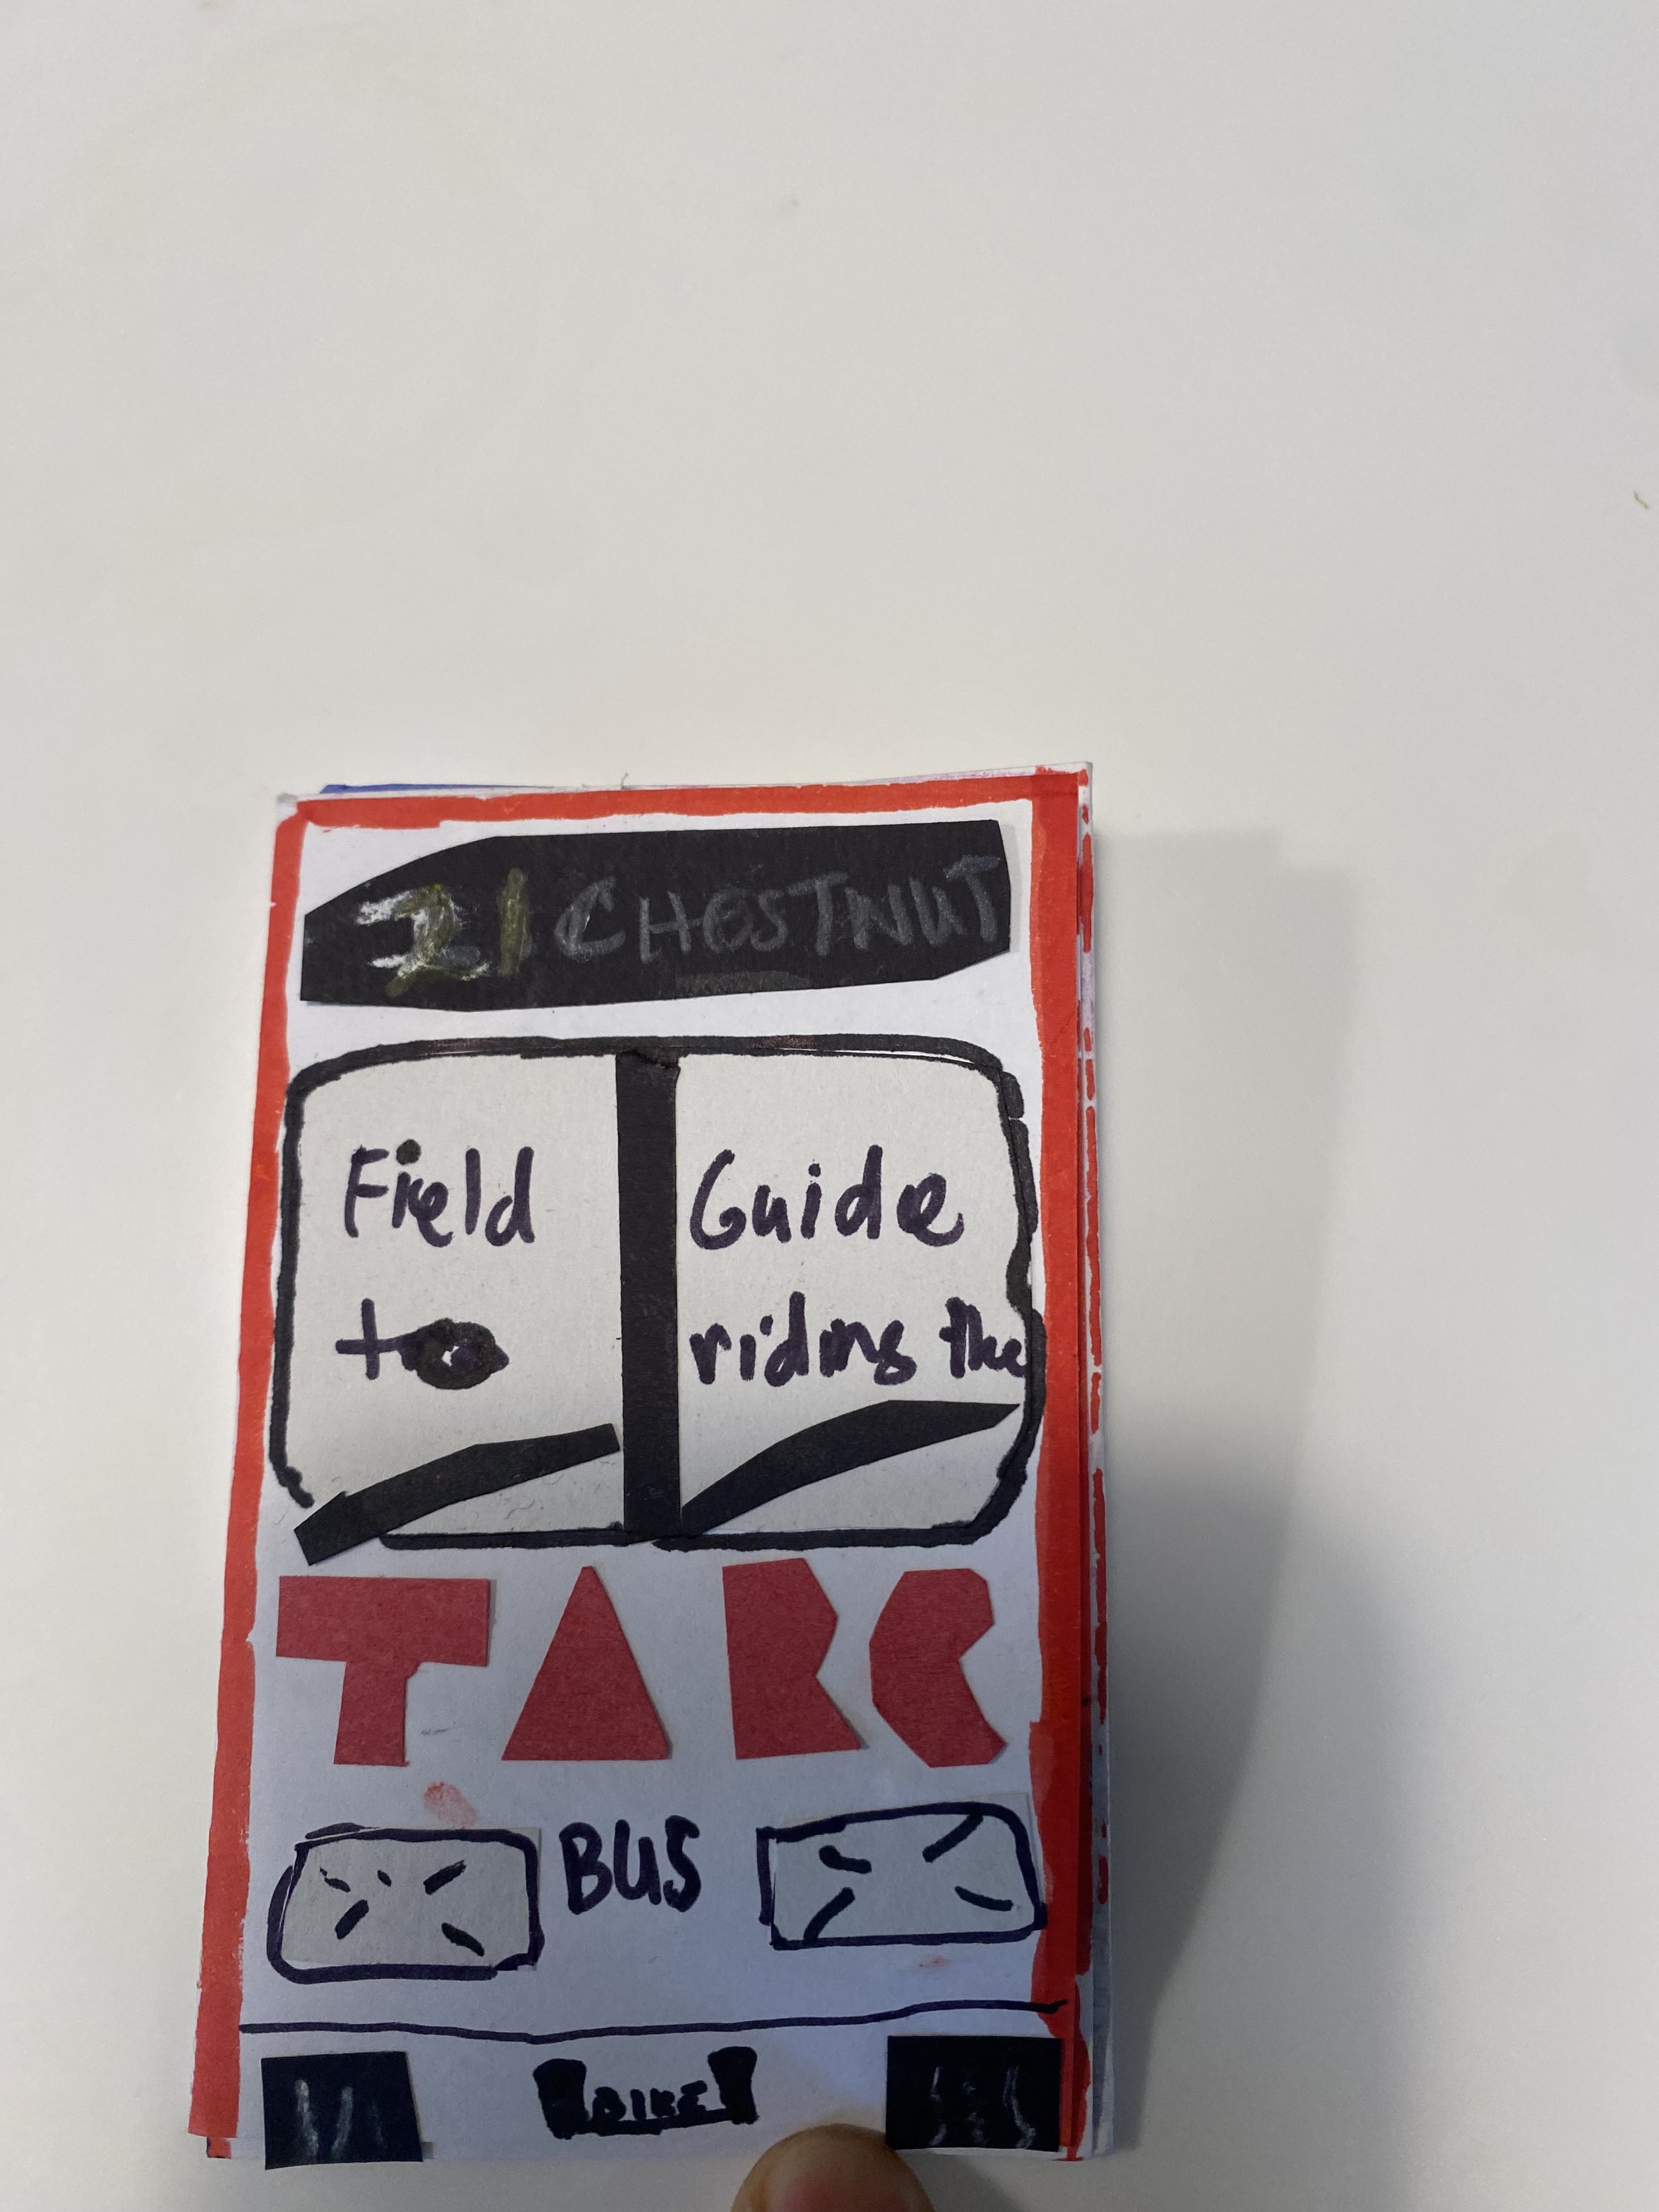 "Field Guide to Riding the TARC Bus" by Bernard Clay